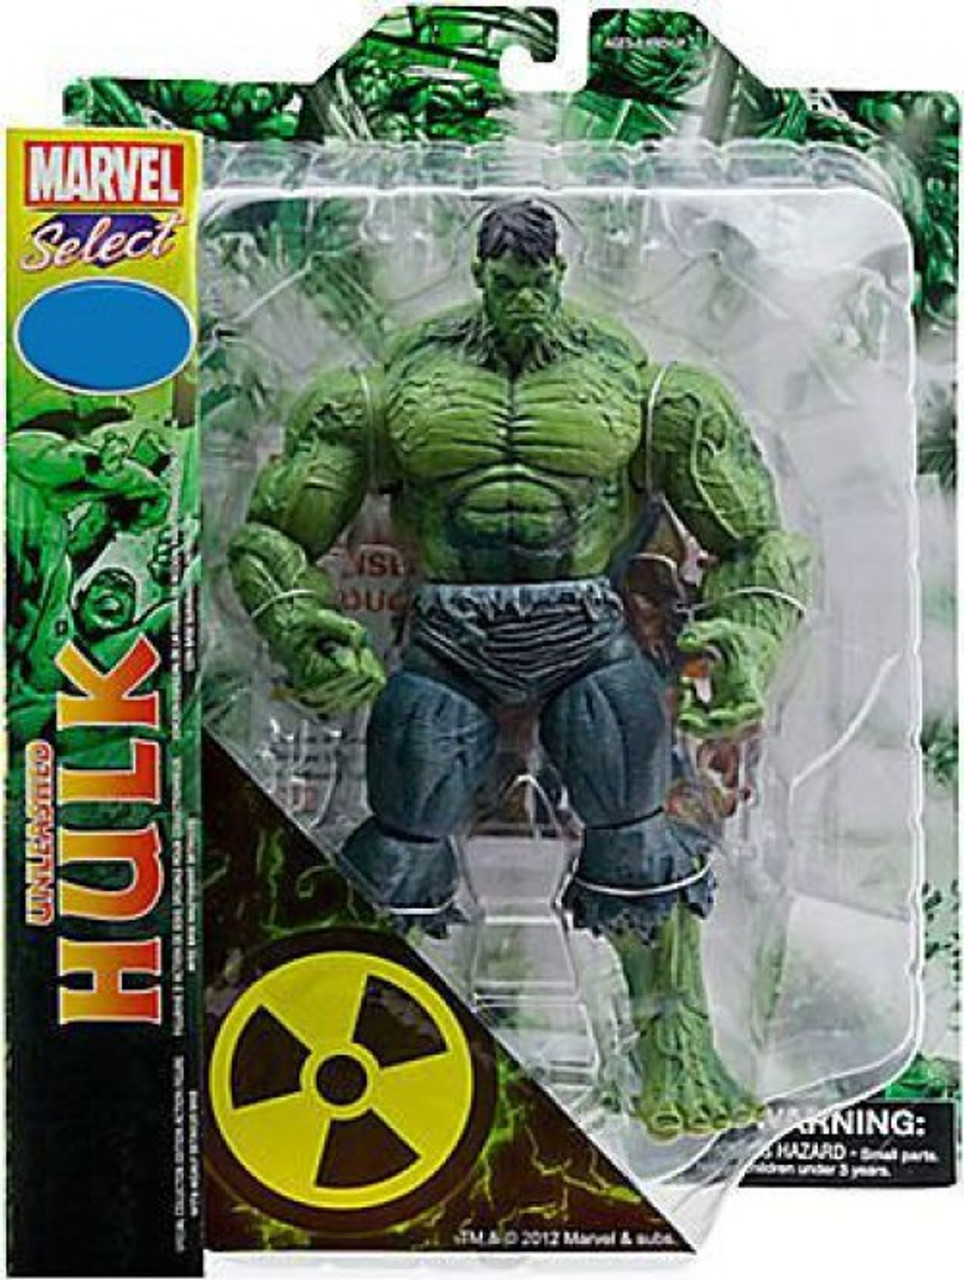 Marvel Marvel Select Unleashed Hulk Exclusive 9 Action